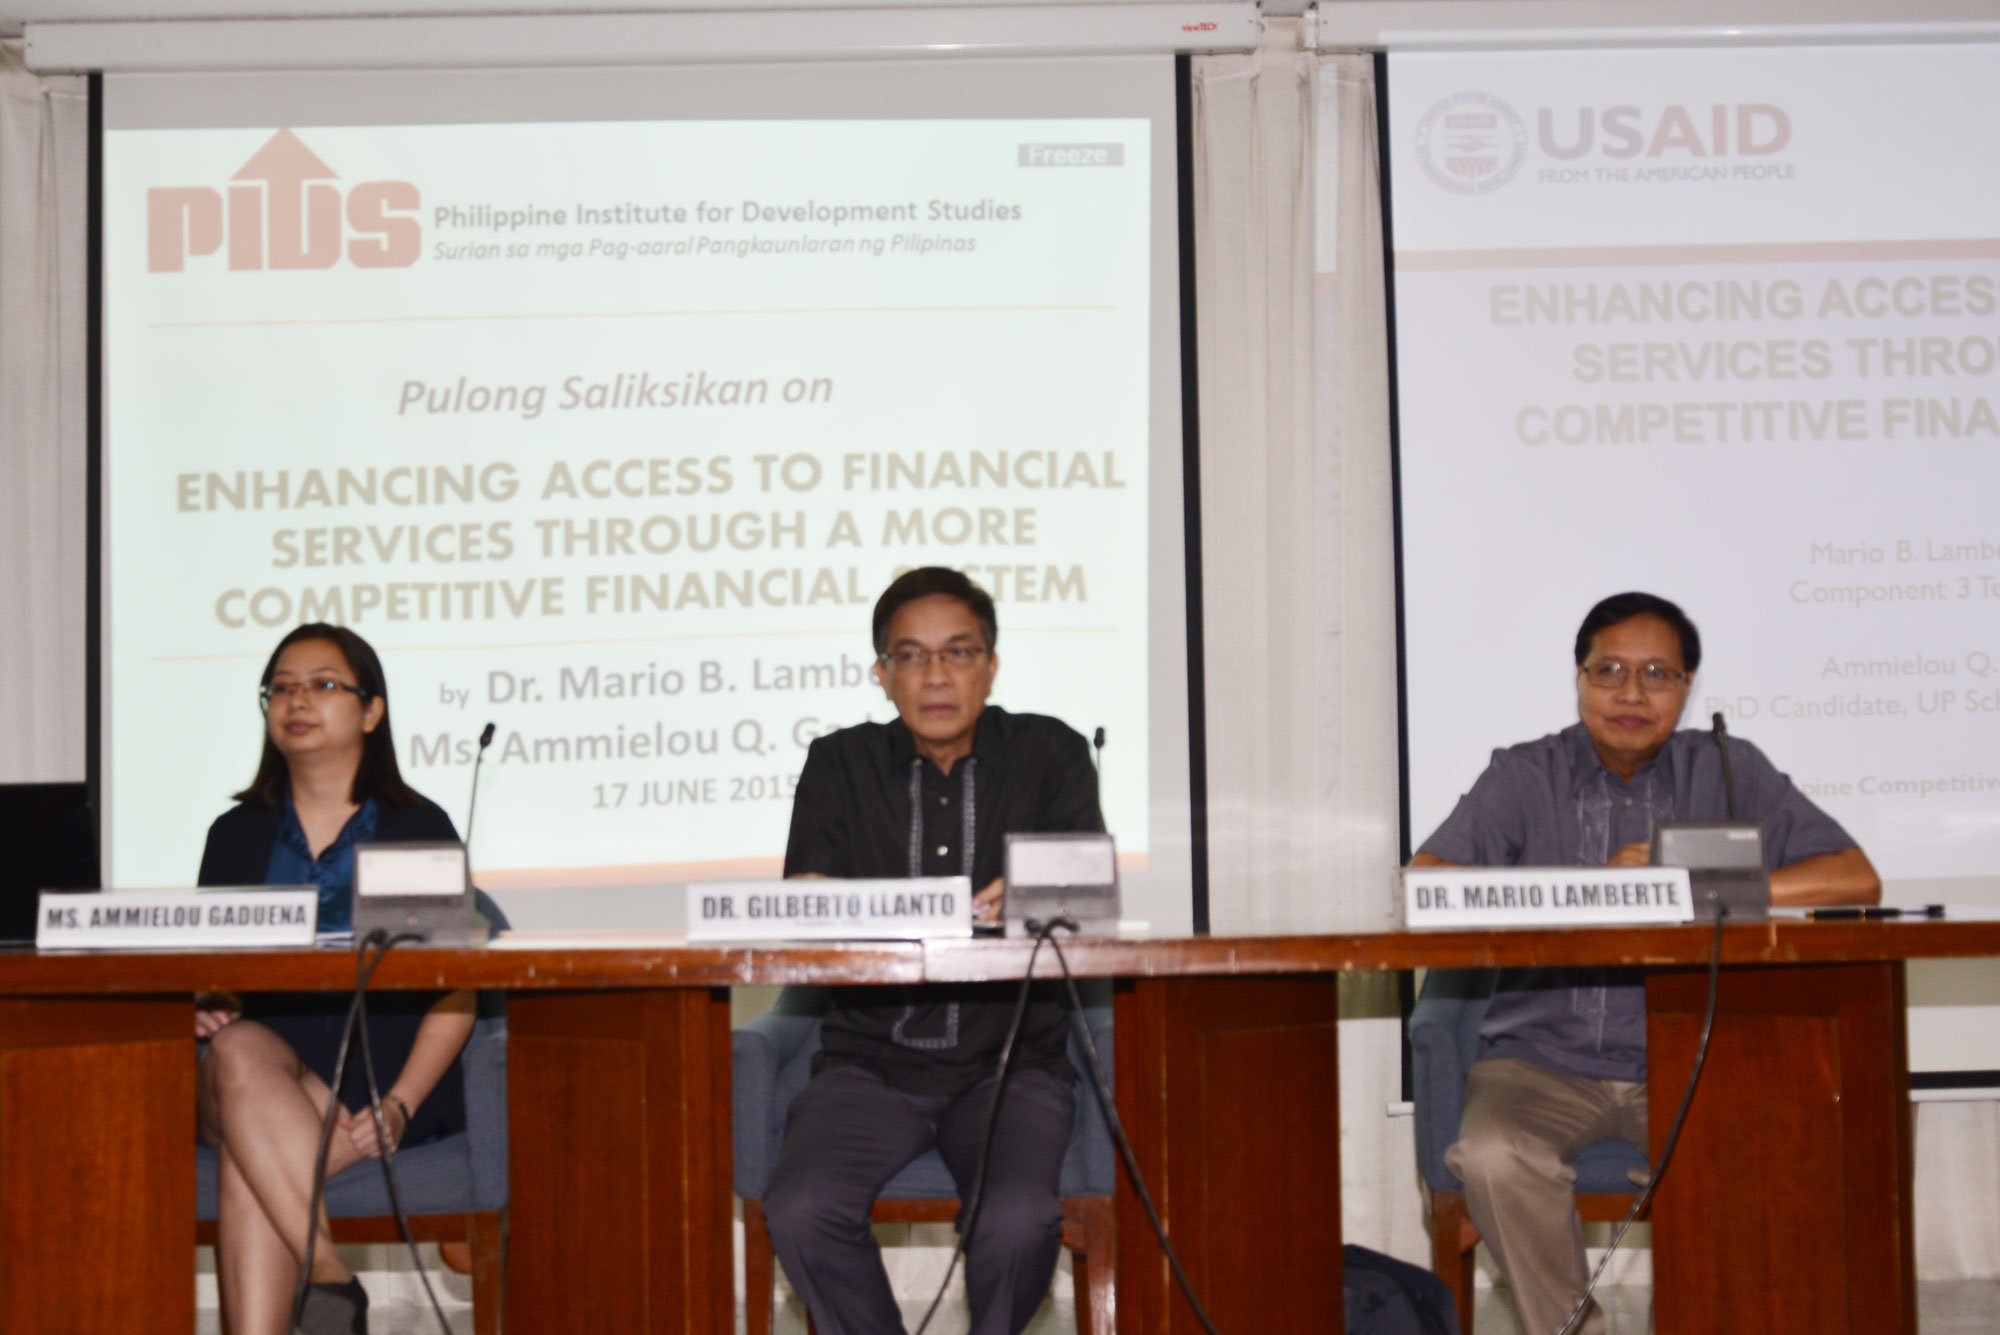 Pulong Saliksikan on Enhancing Access to Financial Services through a More Competitive Financial System-DSC_3528.jpg